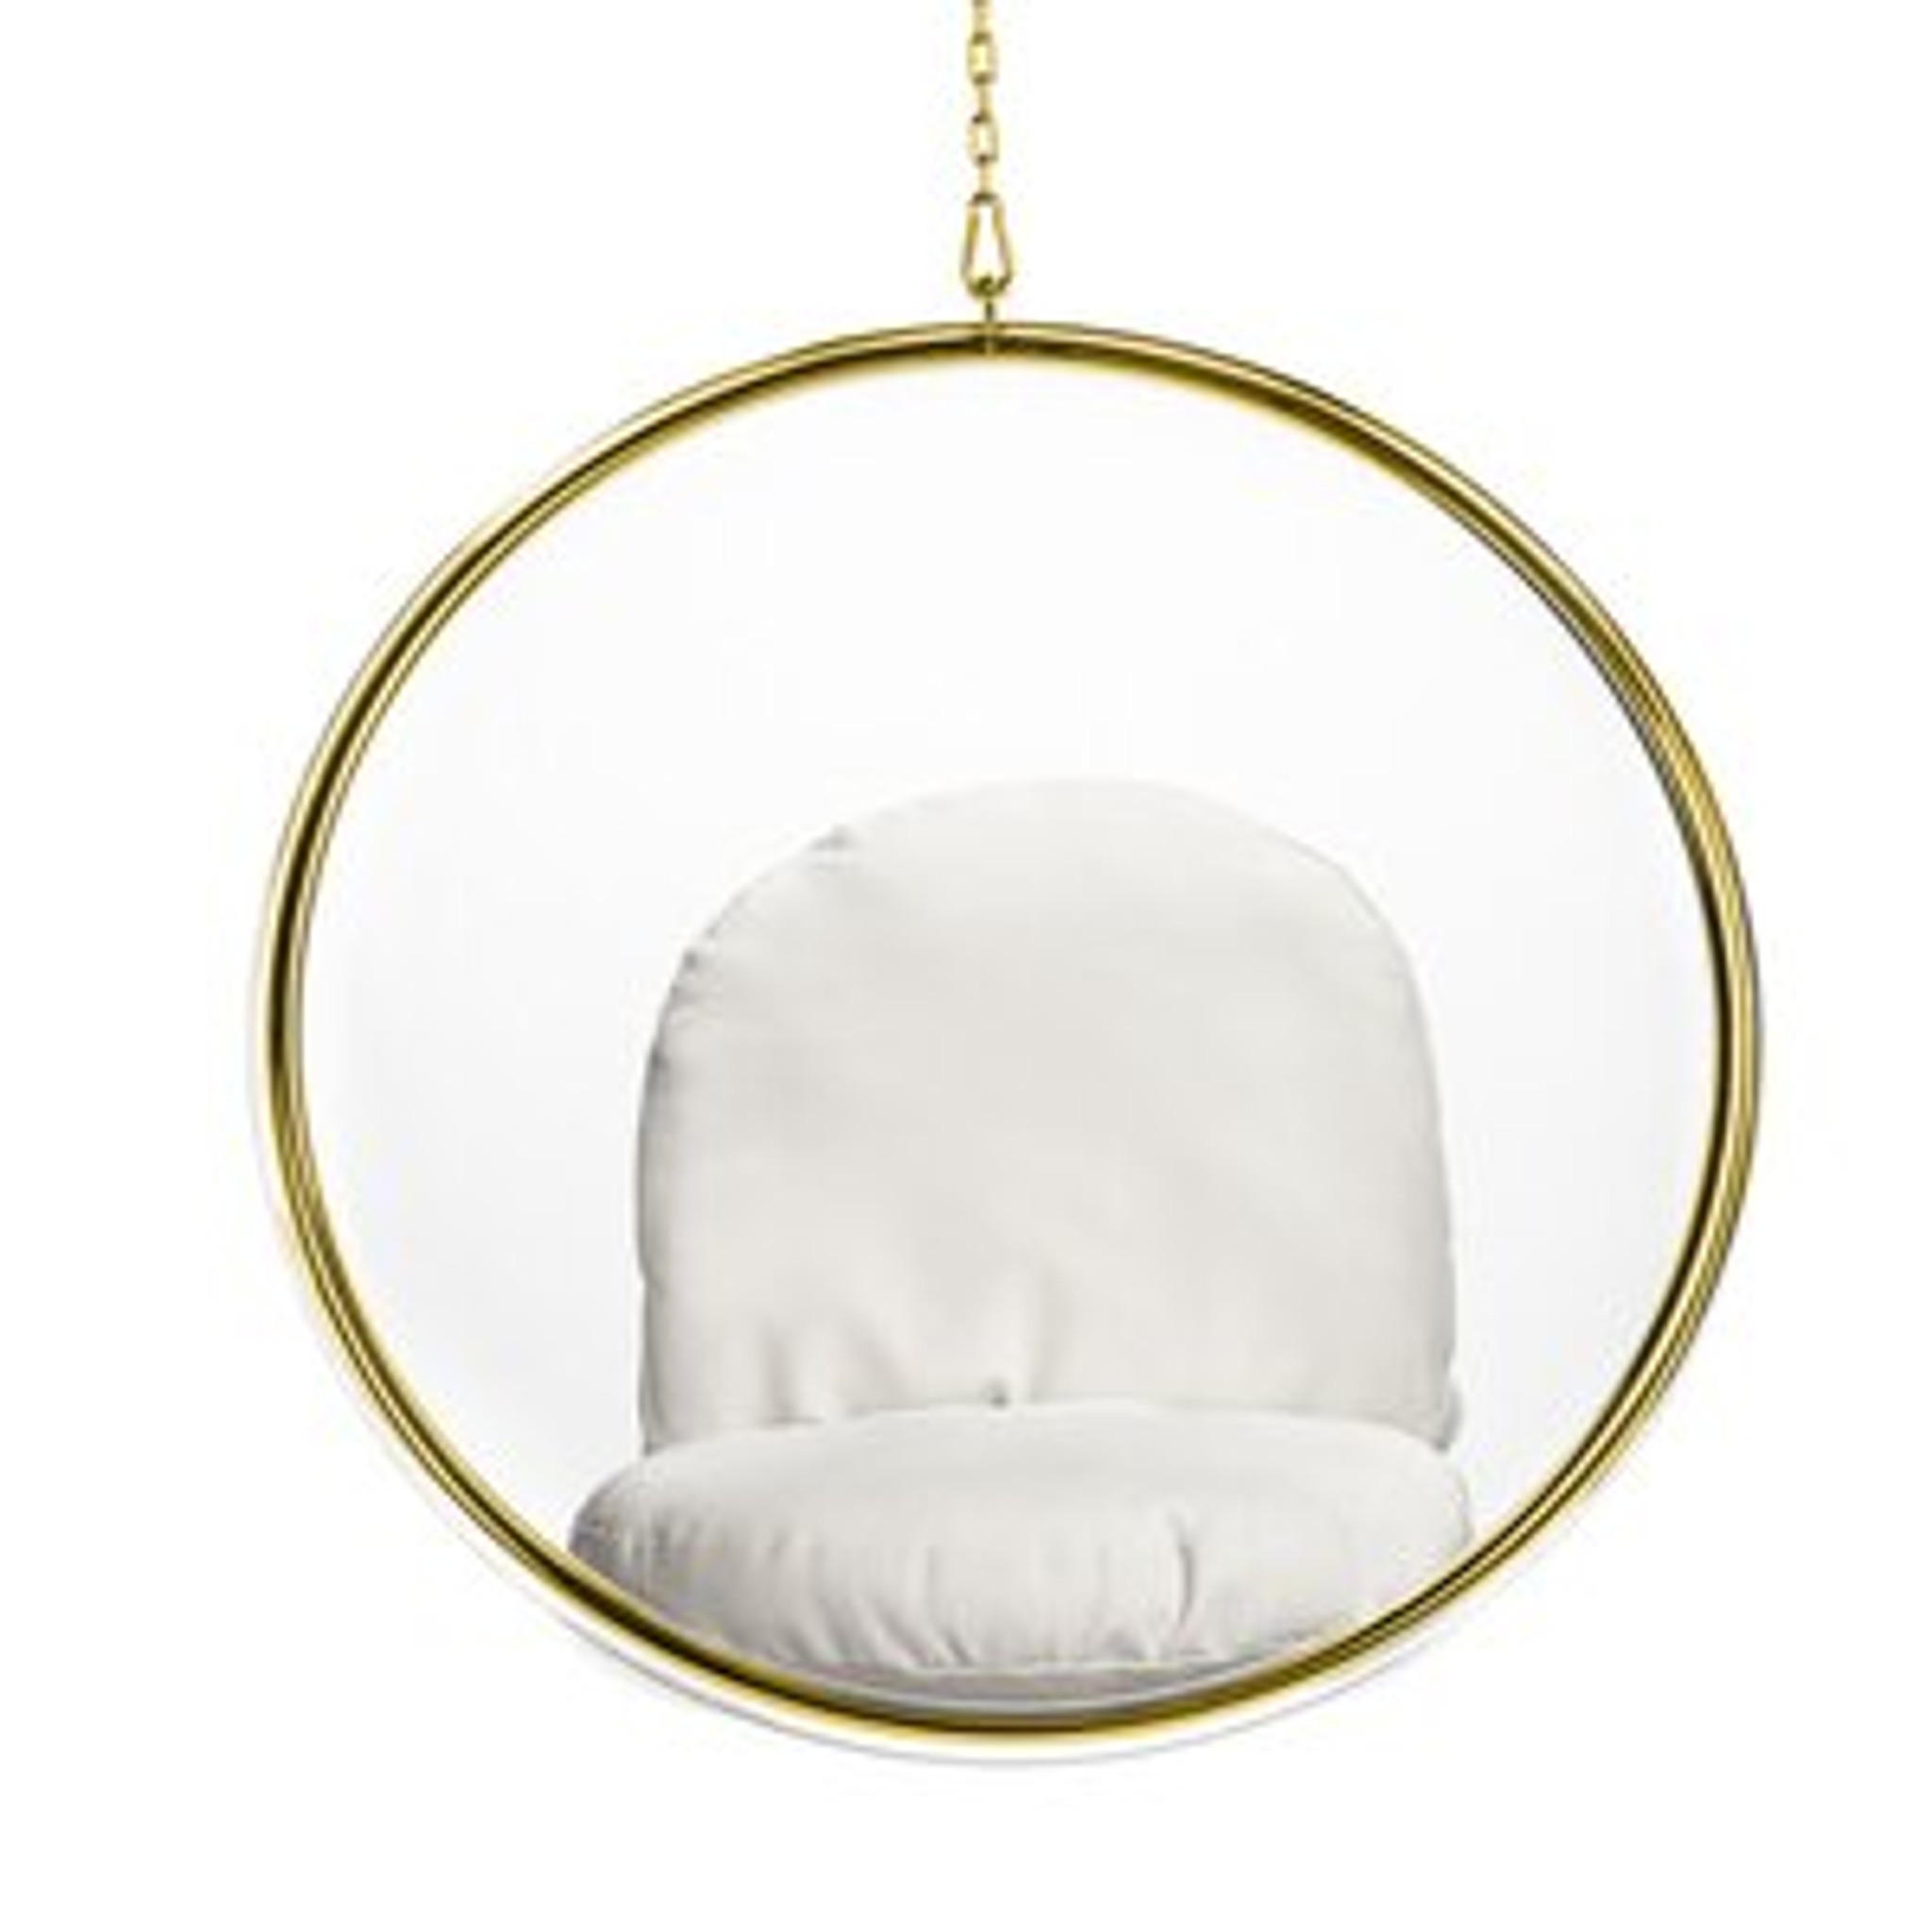 gold trim hanging bubble chair with white cushion set clear acrylic lucite plastic